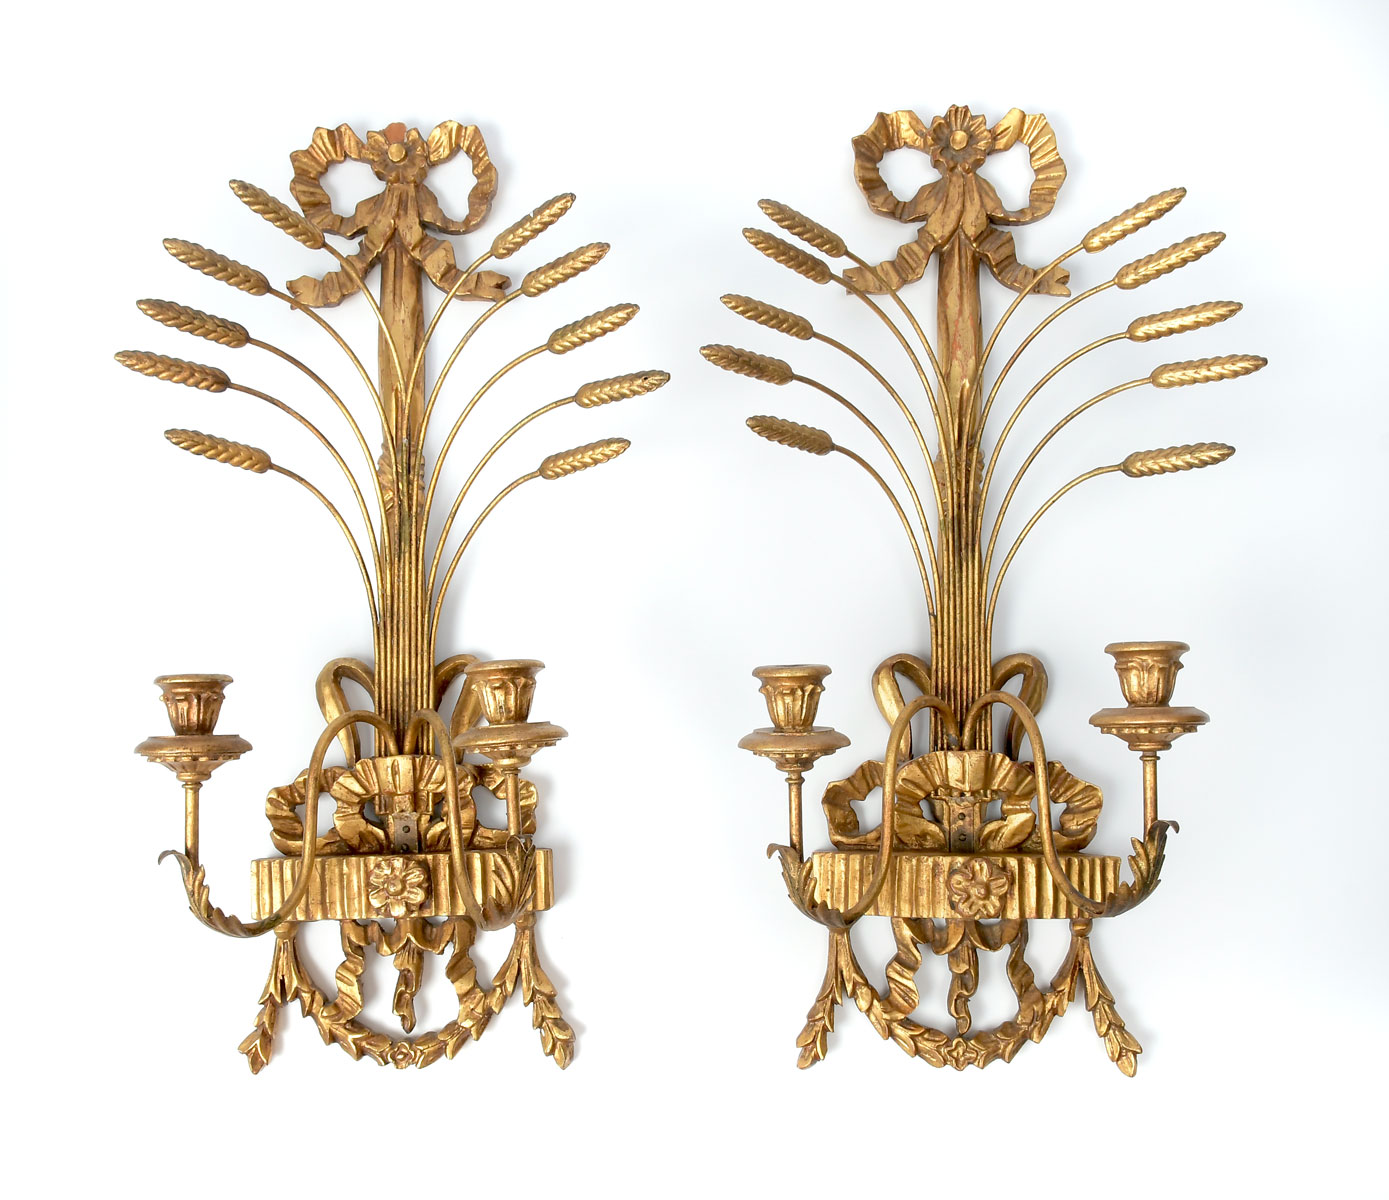 PAIR OF CARVED GILT ITALIAN WALL